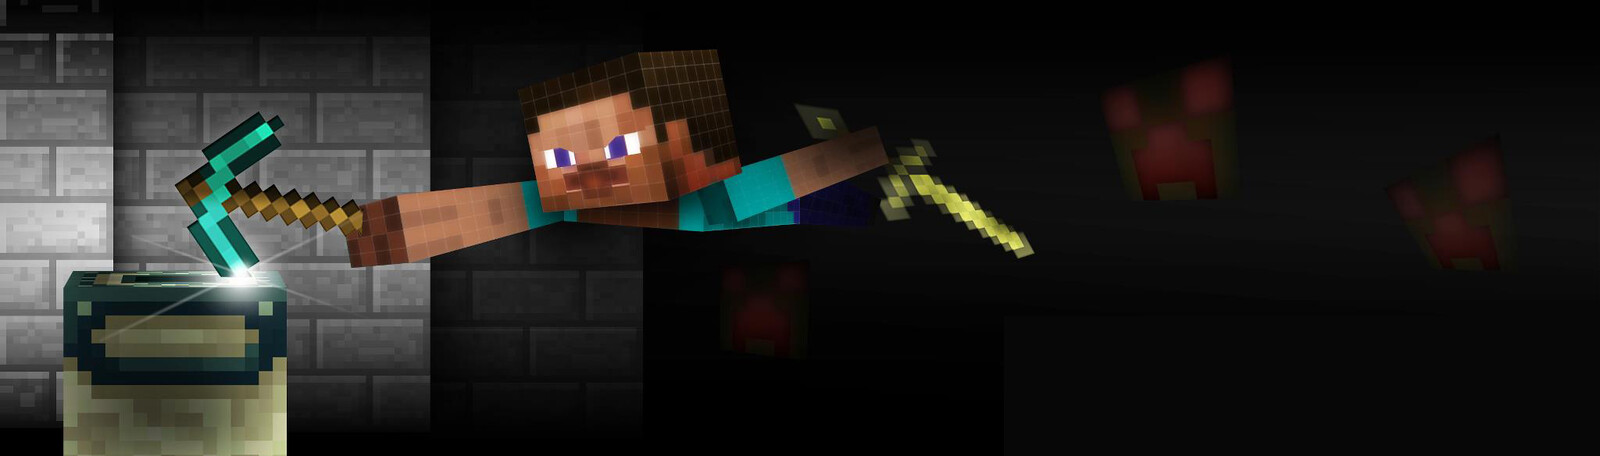 Steve (Minecraft) Diving Away From Creepers - Photoshop